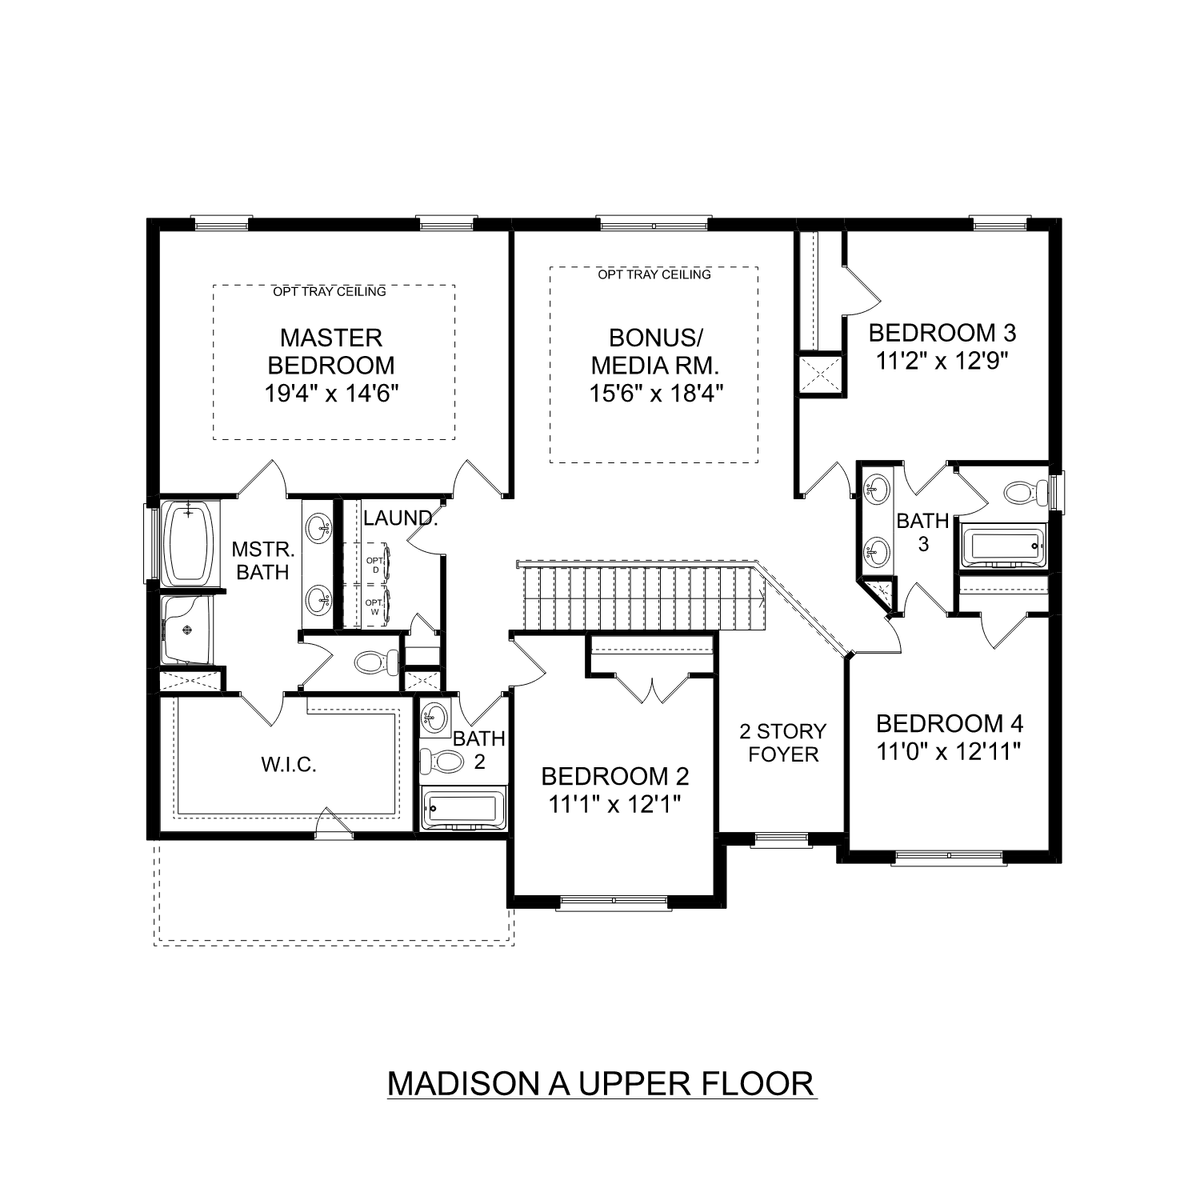 2 - The Madison A buildable floor plan layout in Davidson Homes' Barnett's Crossing community.